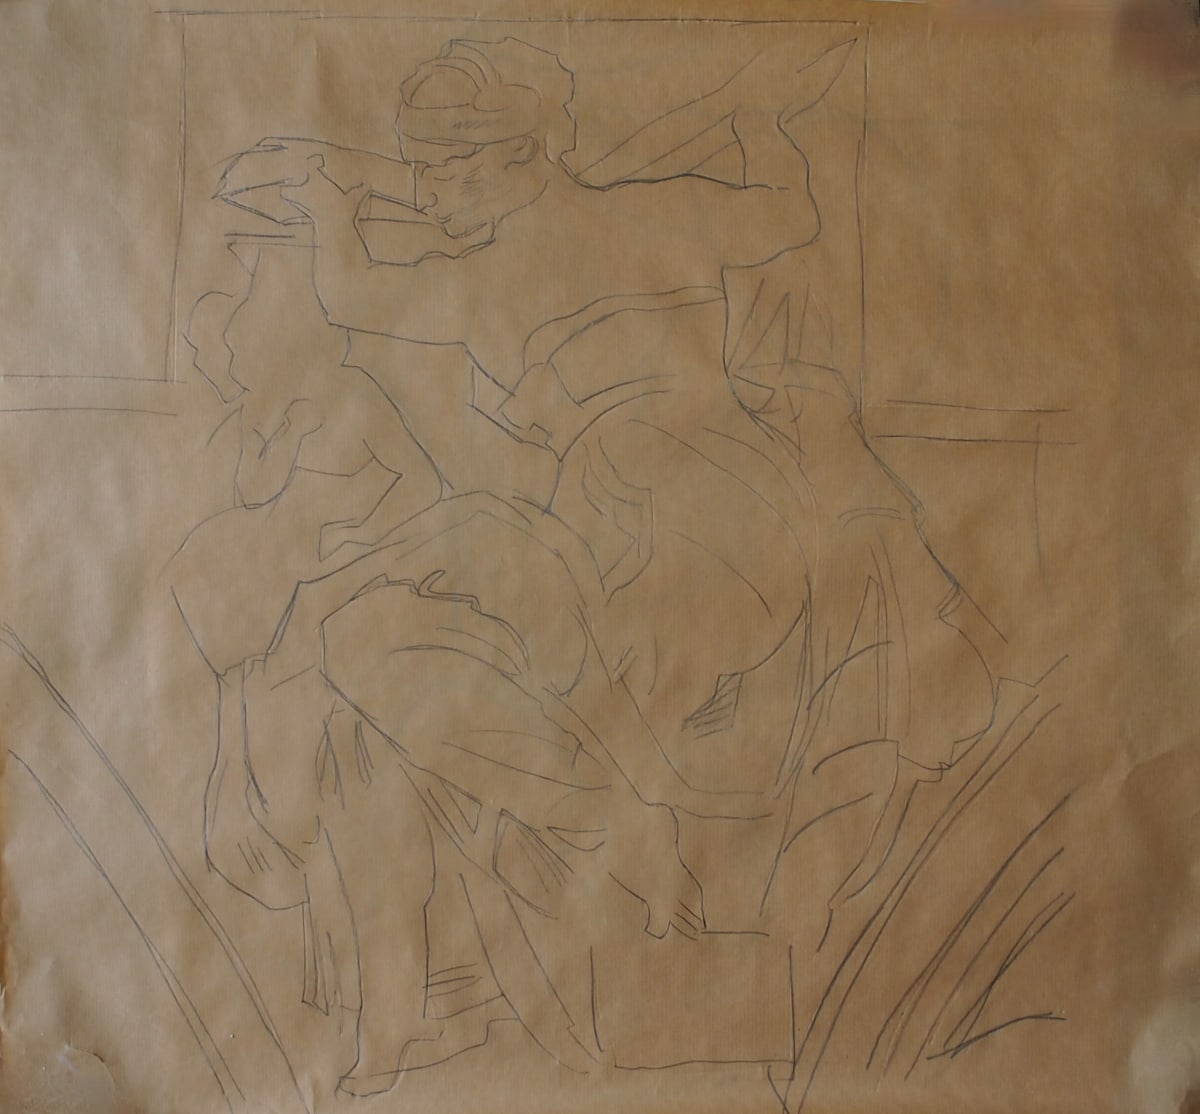 Lybian Sybil - drawing for fresco (2008) by Maryleen Schiltkamp  Image: drawing as a preparation for fresco painting